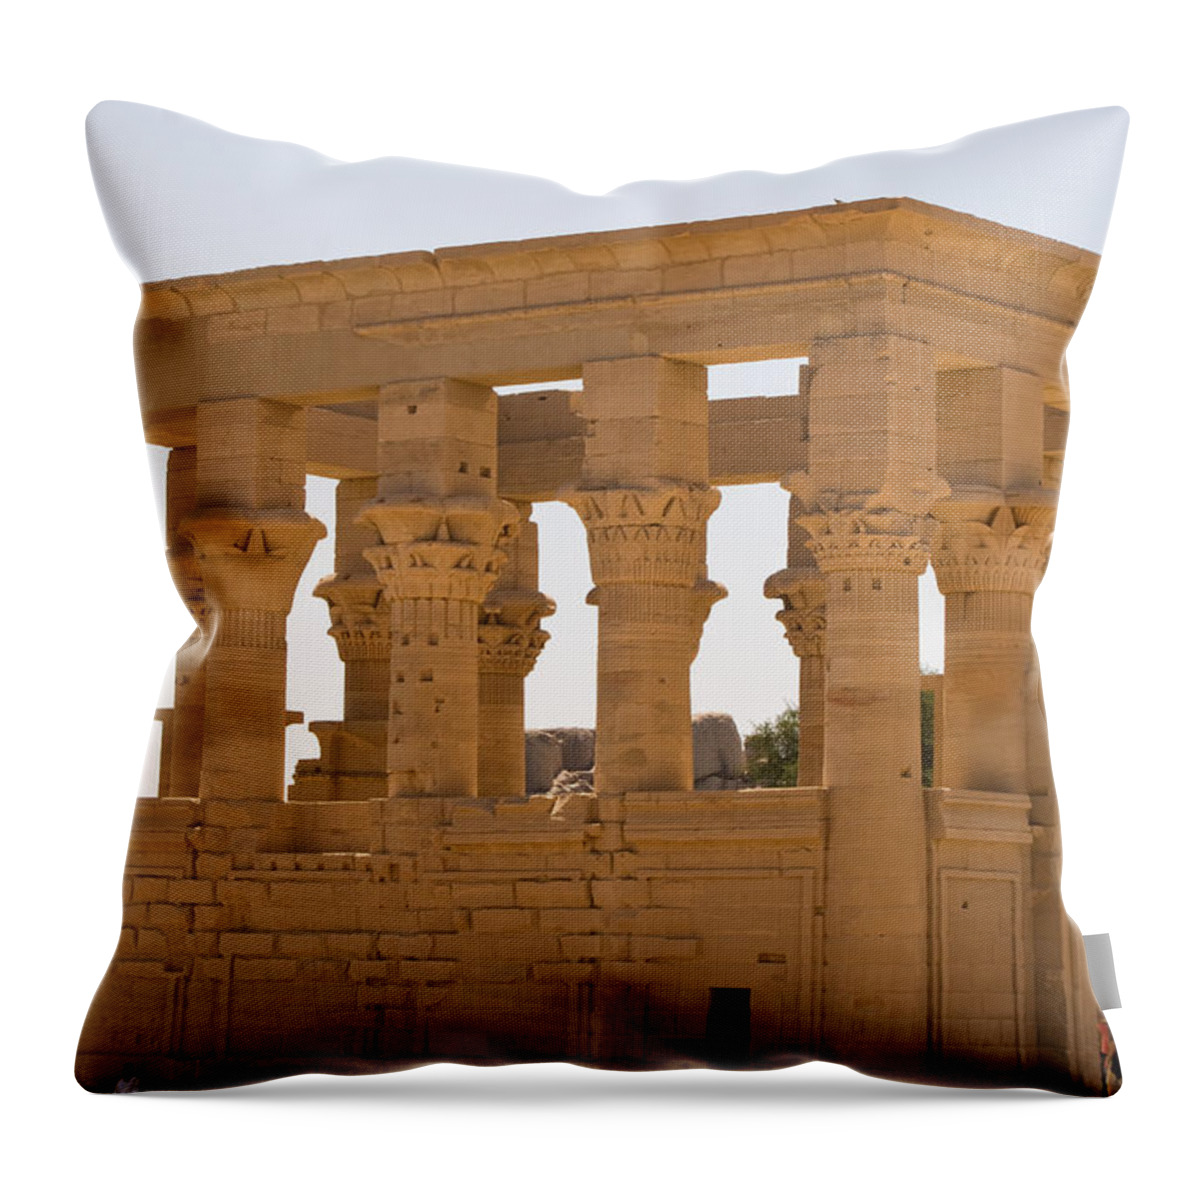  Throw Pillow featuring the photograph Old Structure 3 by James Gay